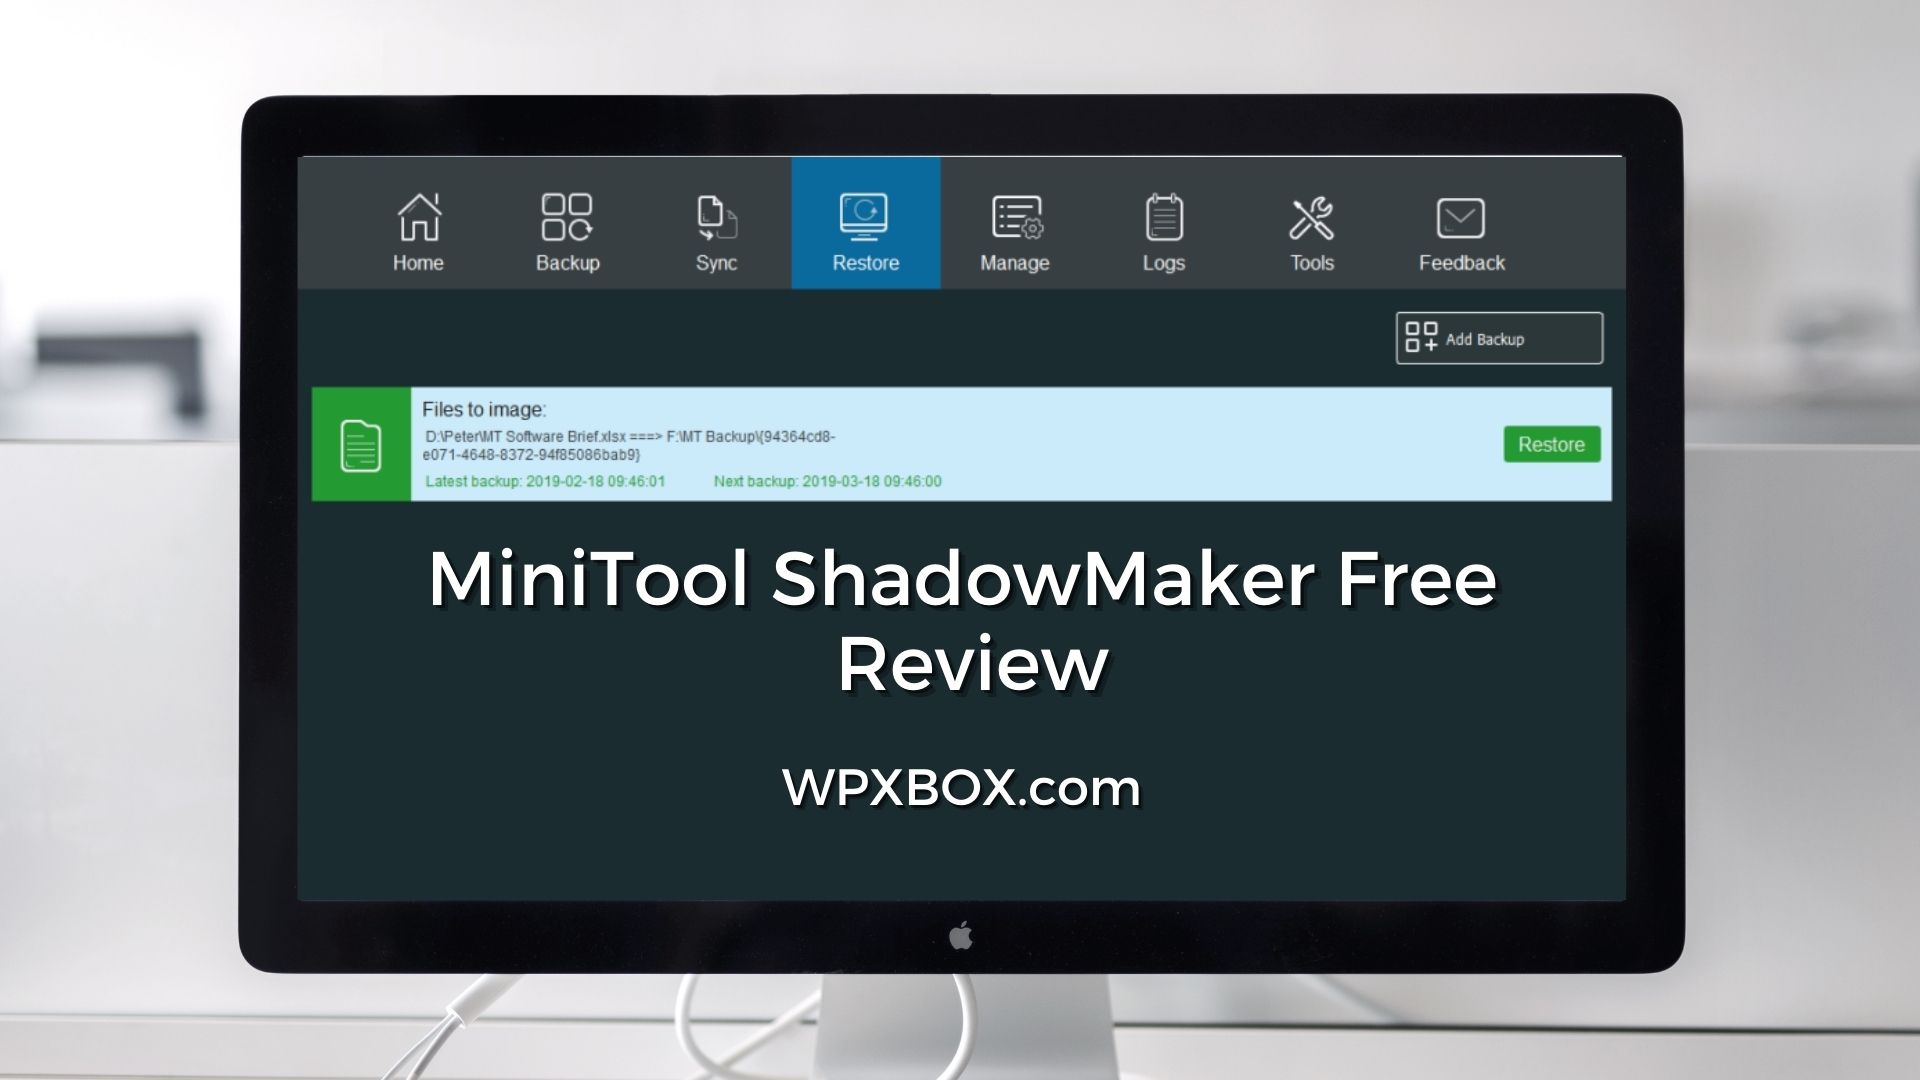 download the new version for ios MiniTool ShadowMaker 4.2.0